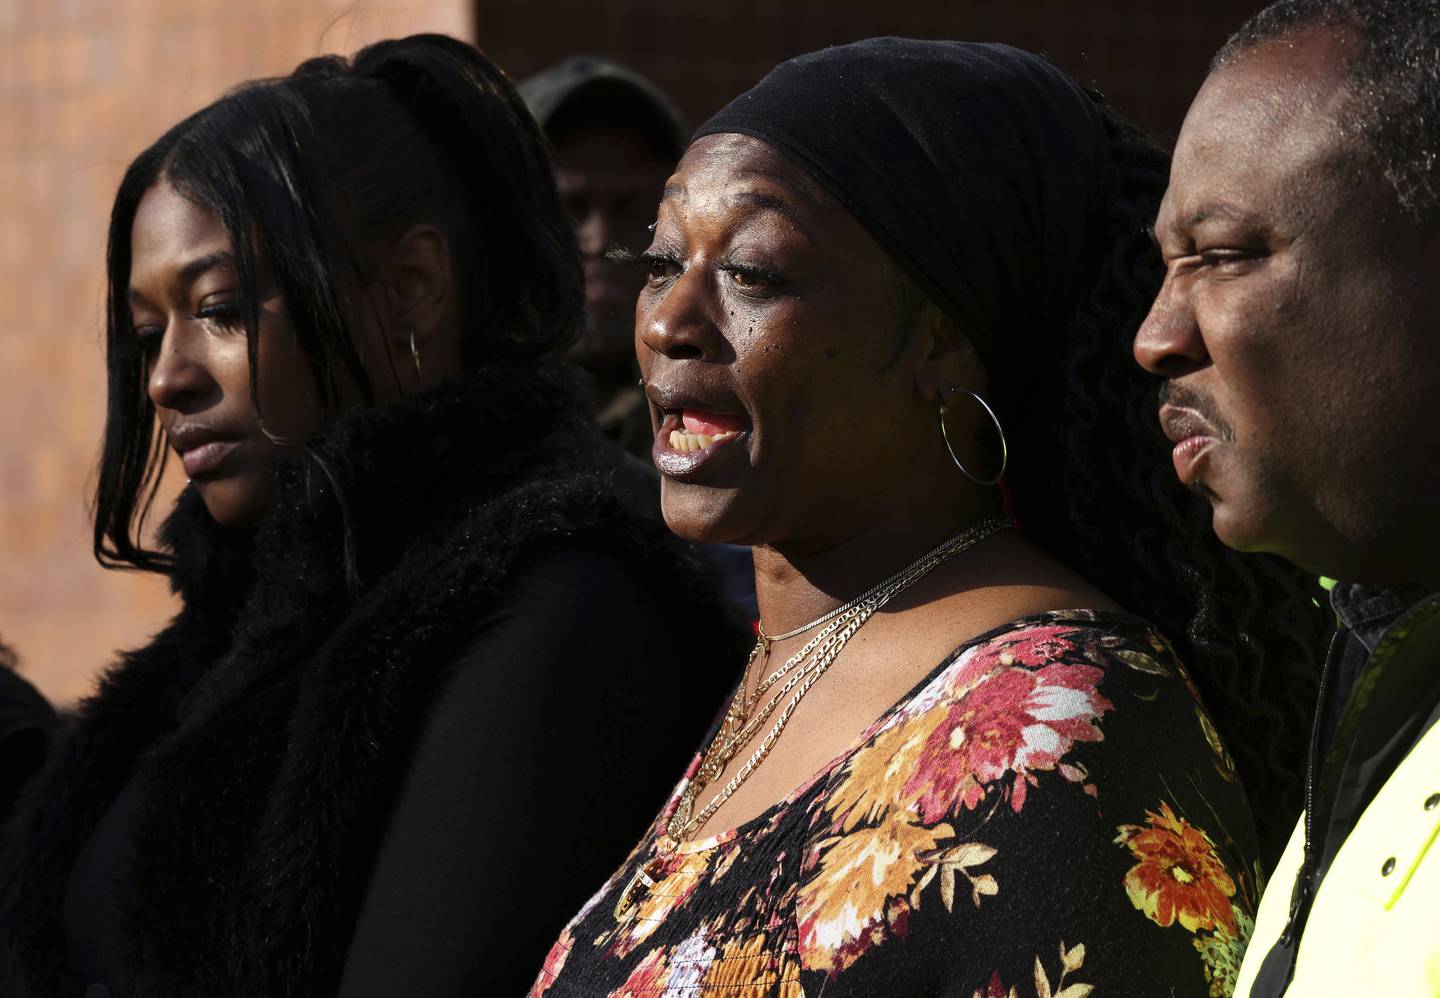 Lutia Payne Midcalf, center, the grandmother of an 11-year-old girl who was allegedly sexually assaulted last week, speaks outside Chicago police headquarters on Oct. 11, 2022.  